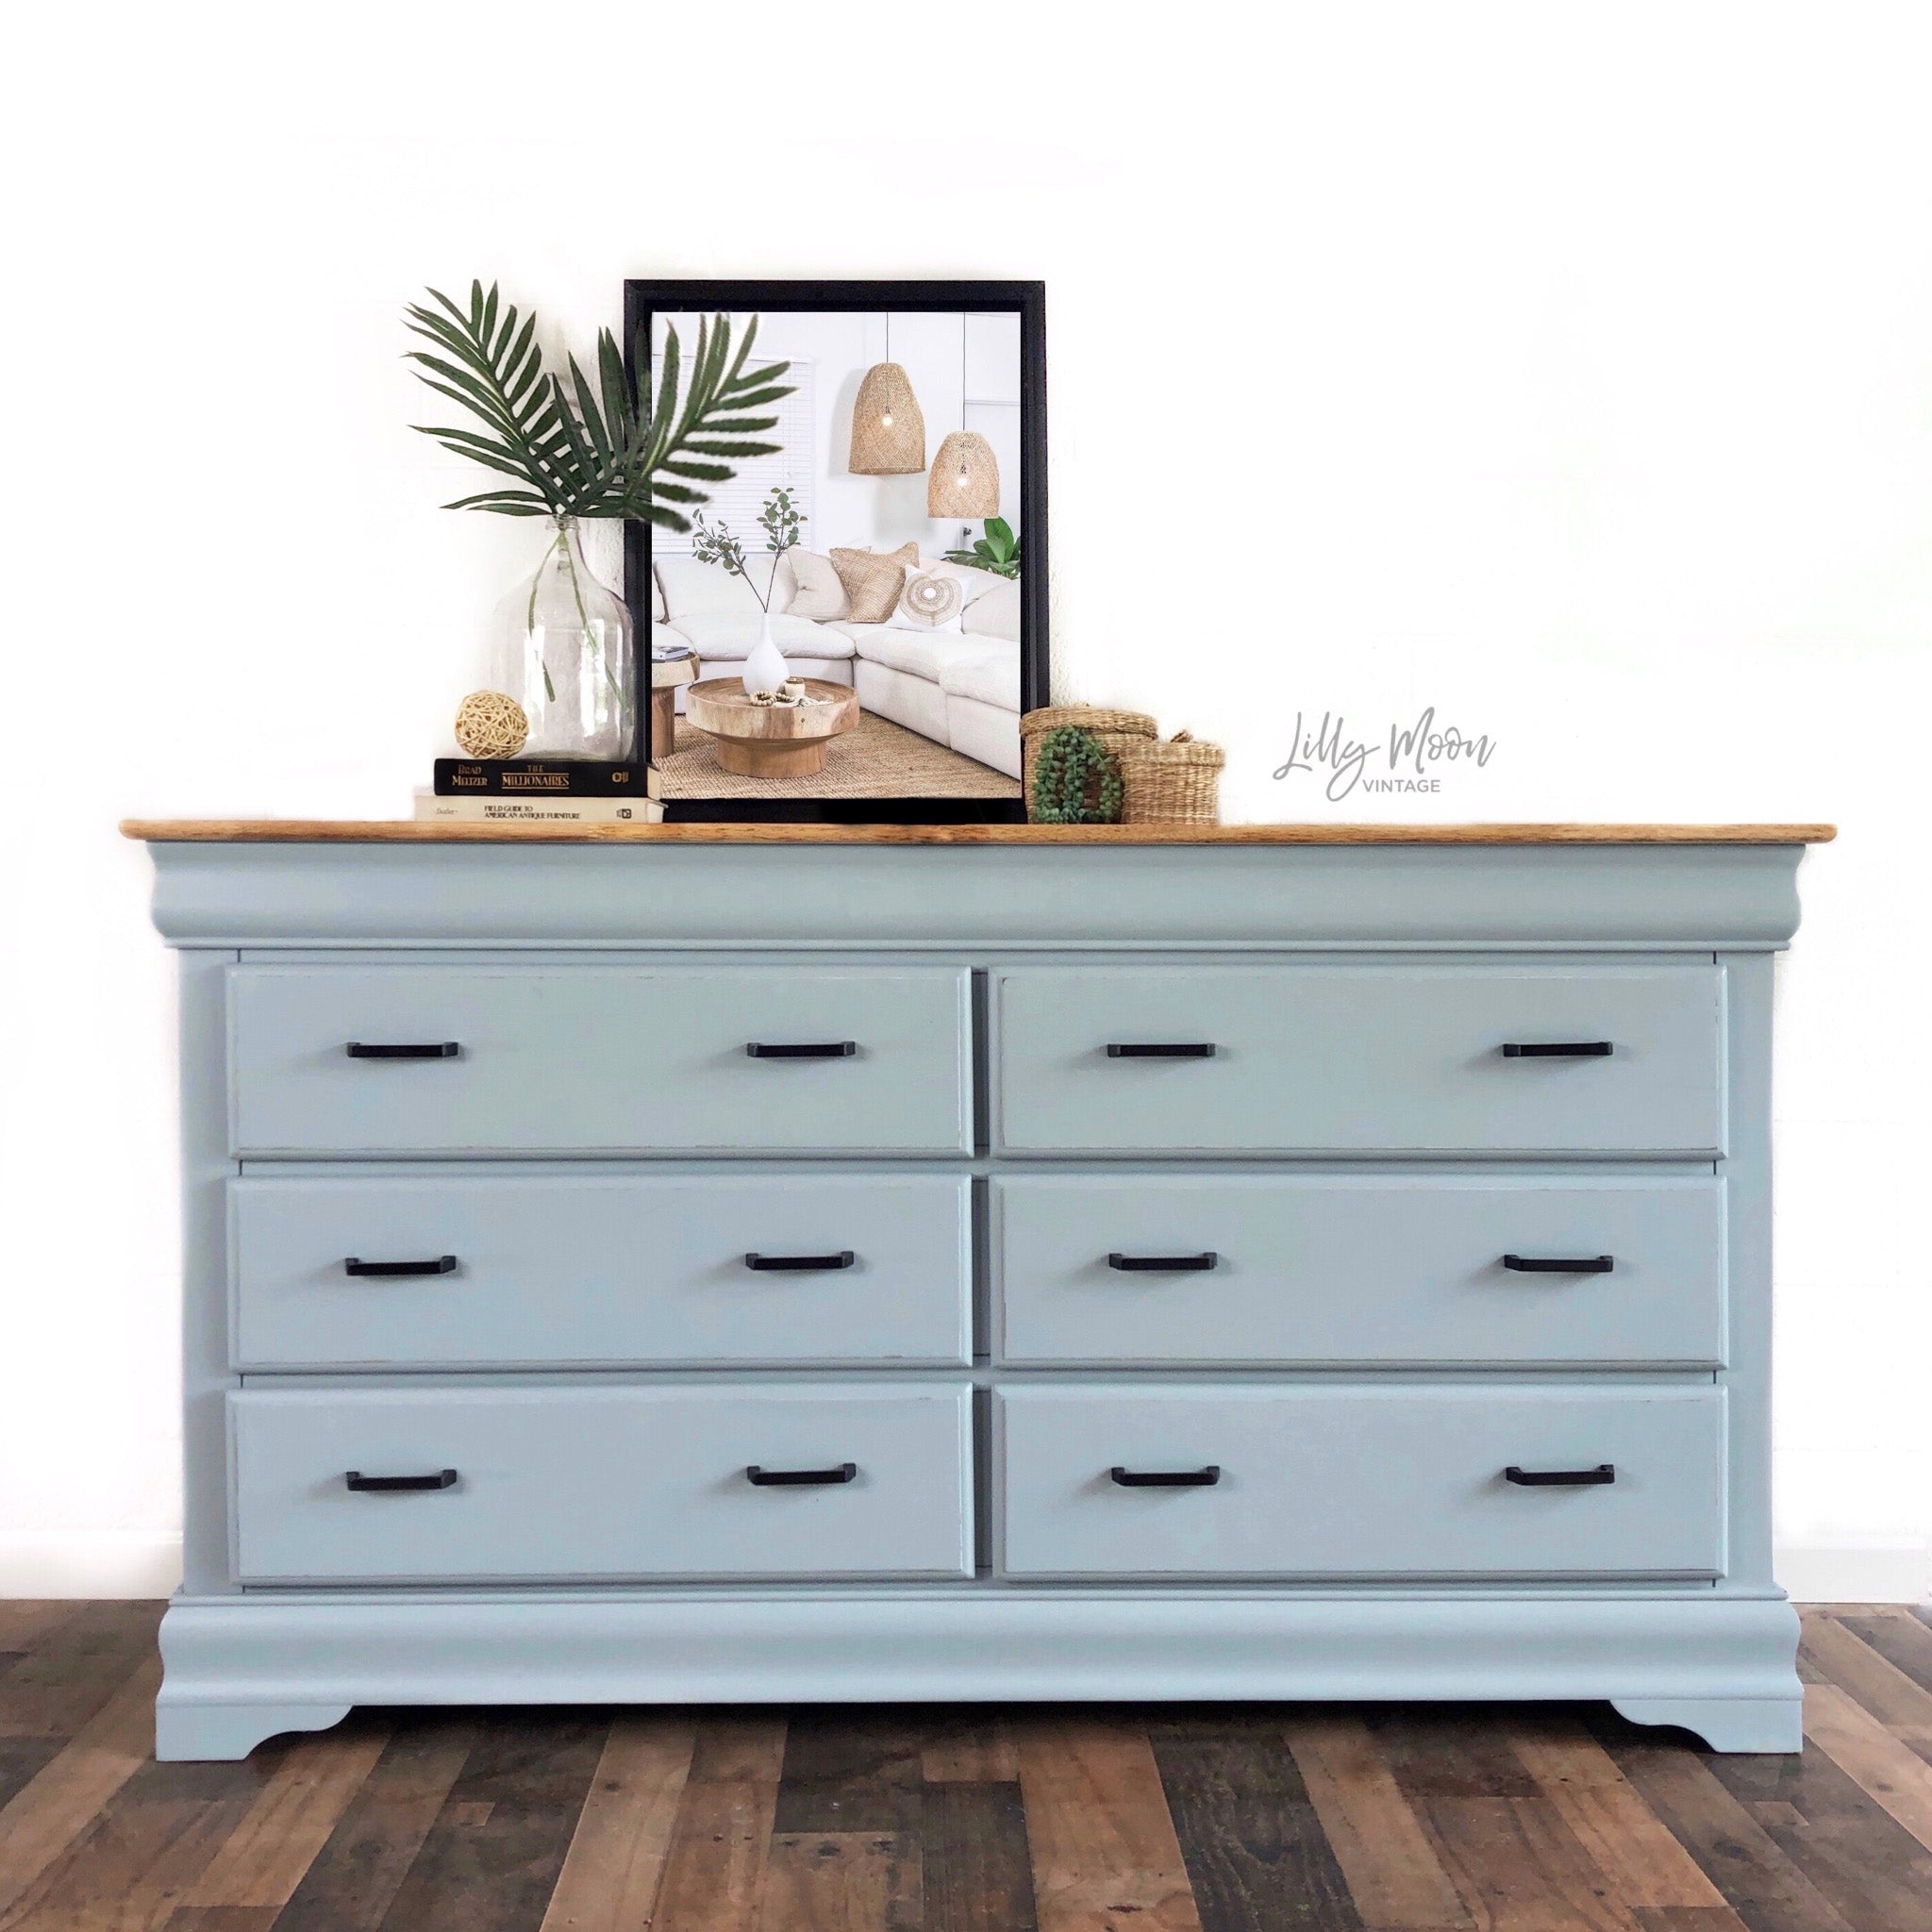 A 6-drawer dresser refurbished by Lilly Moon Designs is painted in Dixie Belle's Savannah Mist chalk mineral paint and has a natural wood top.